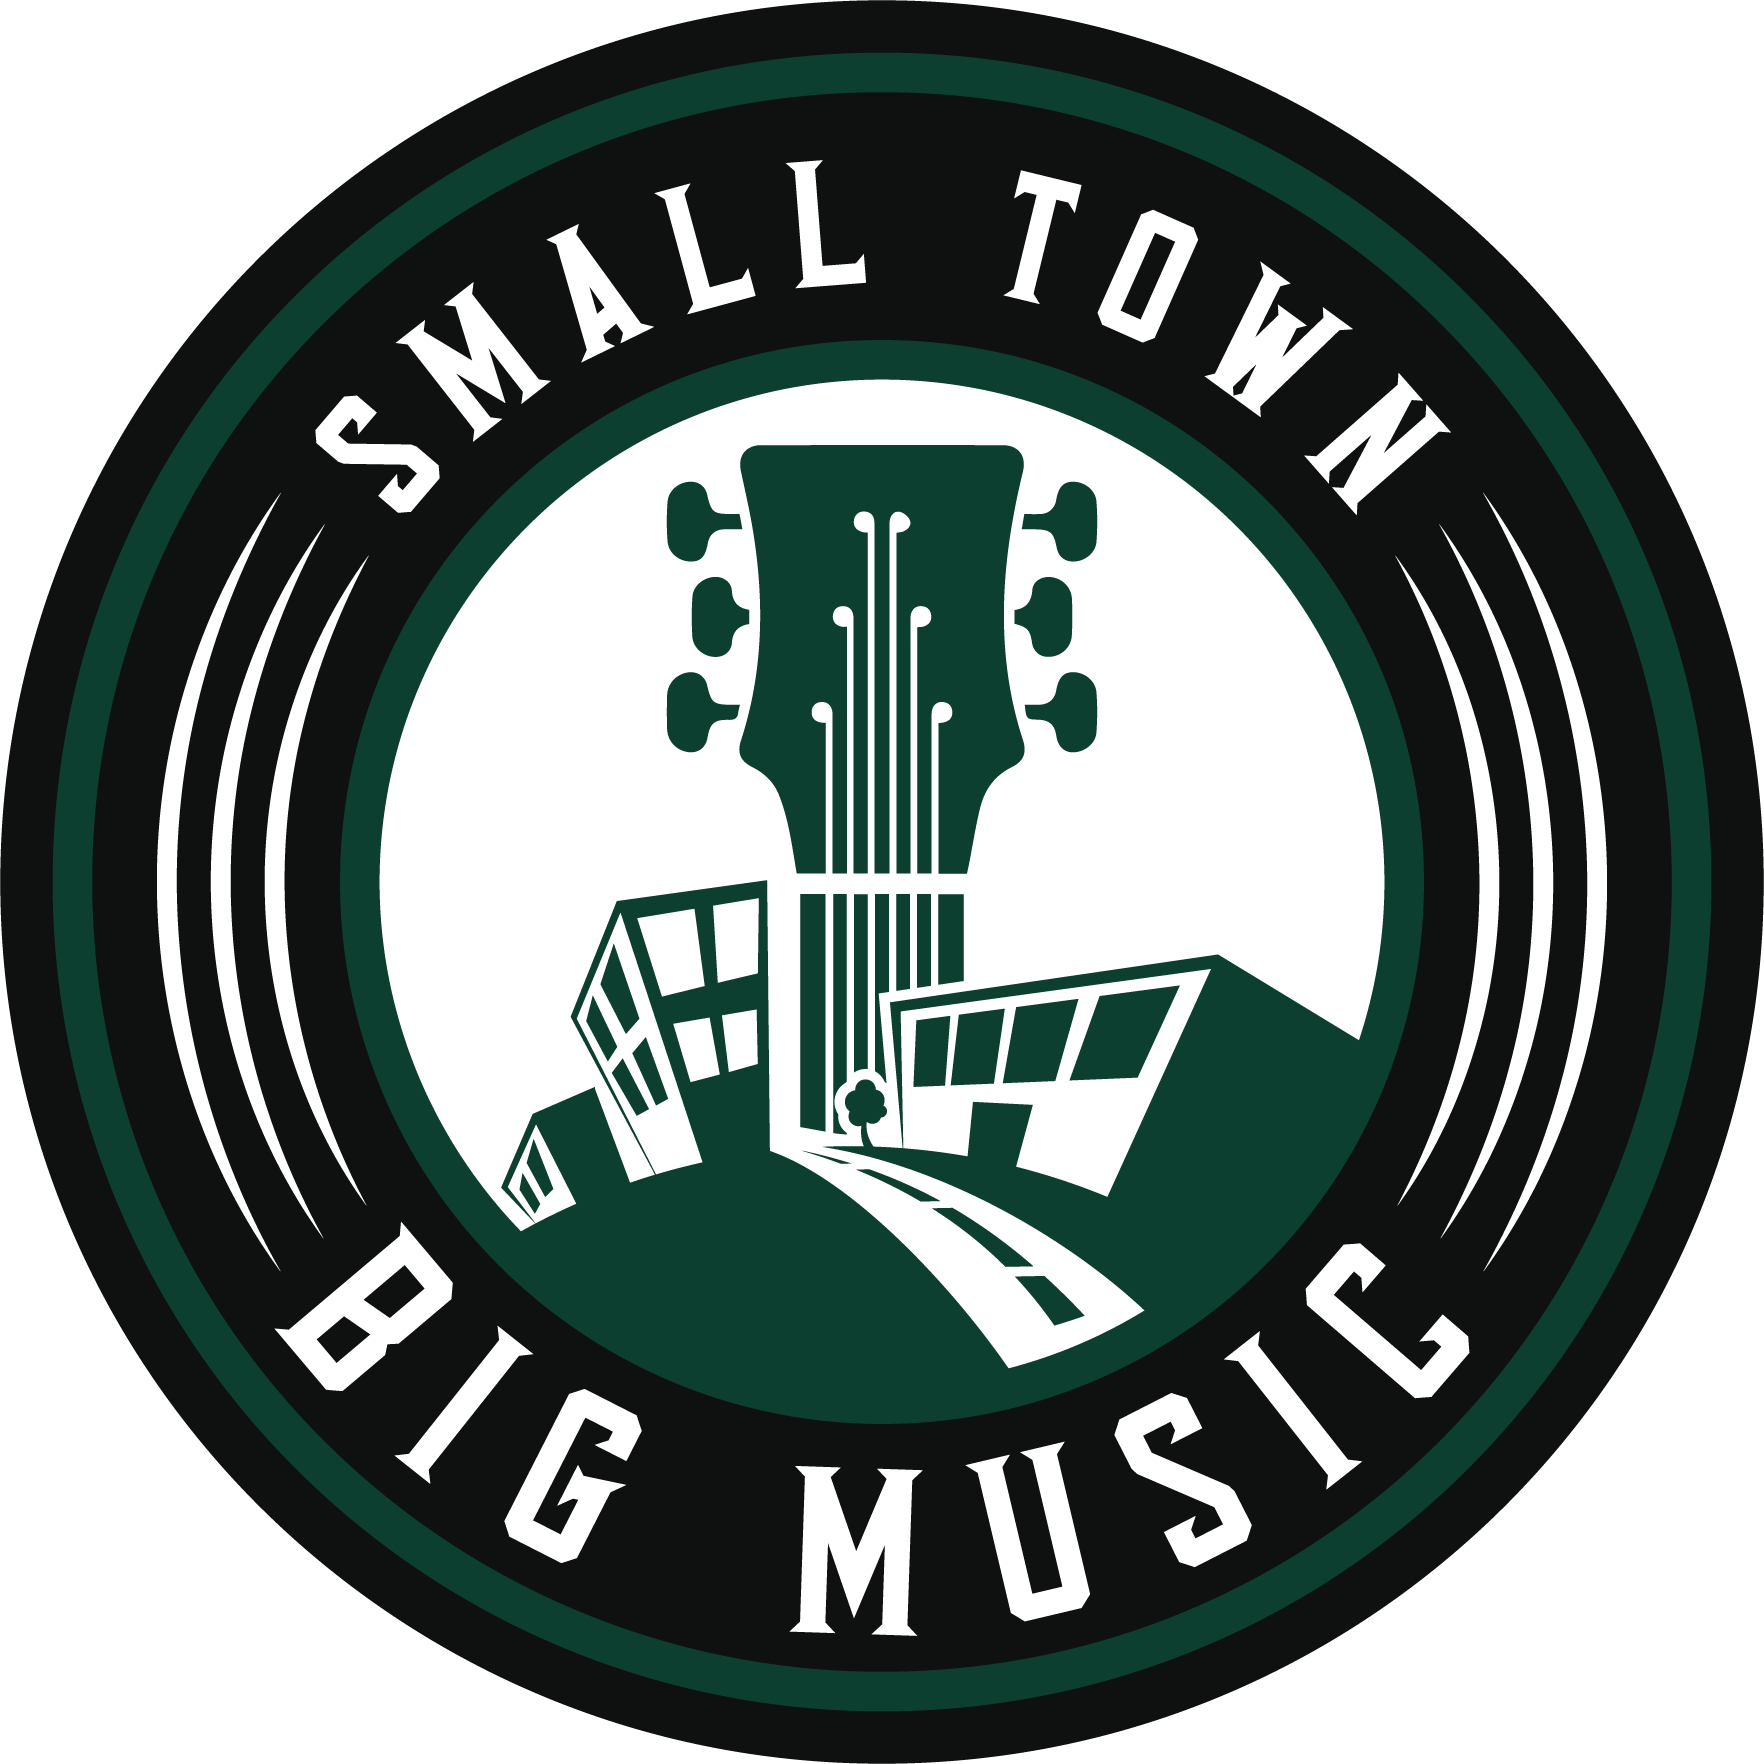 Small Town Big Music A new 3day music festival in North Bristol